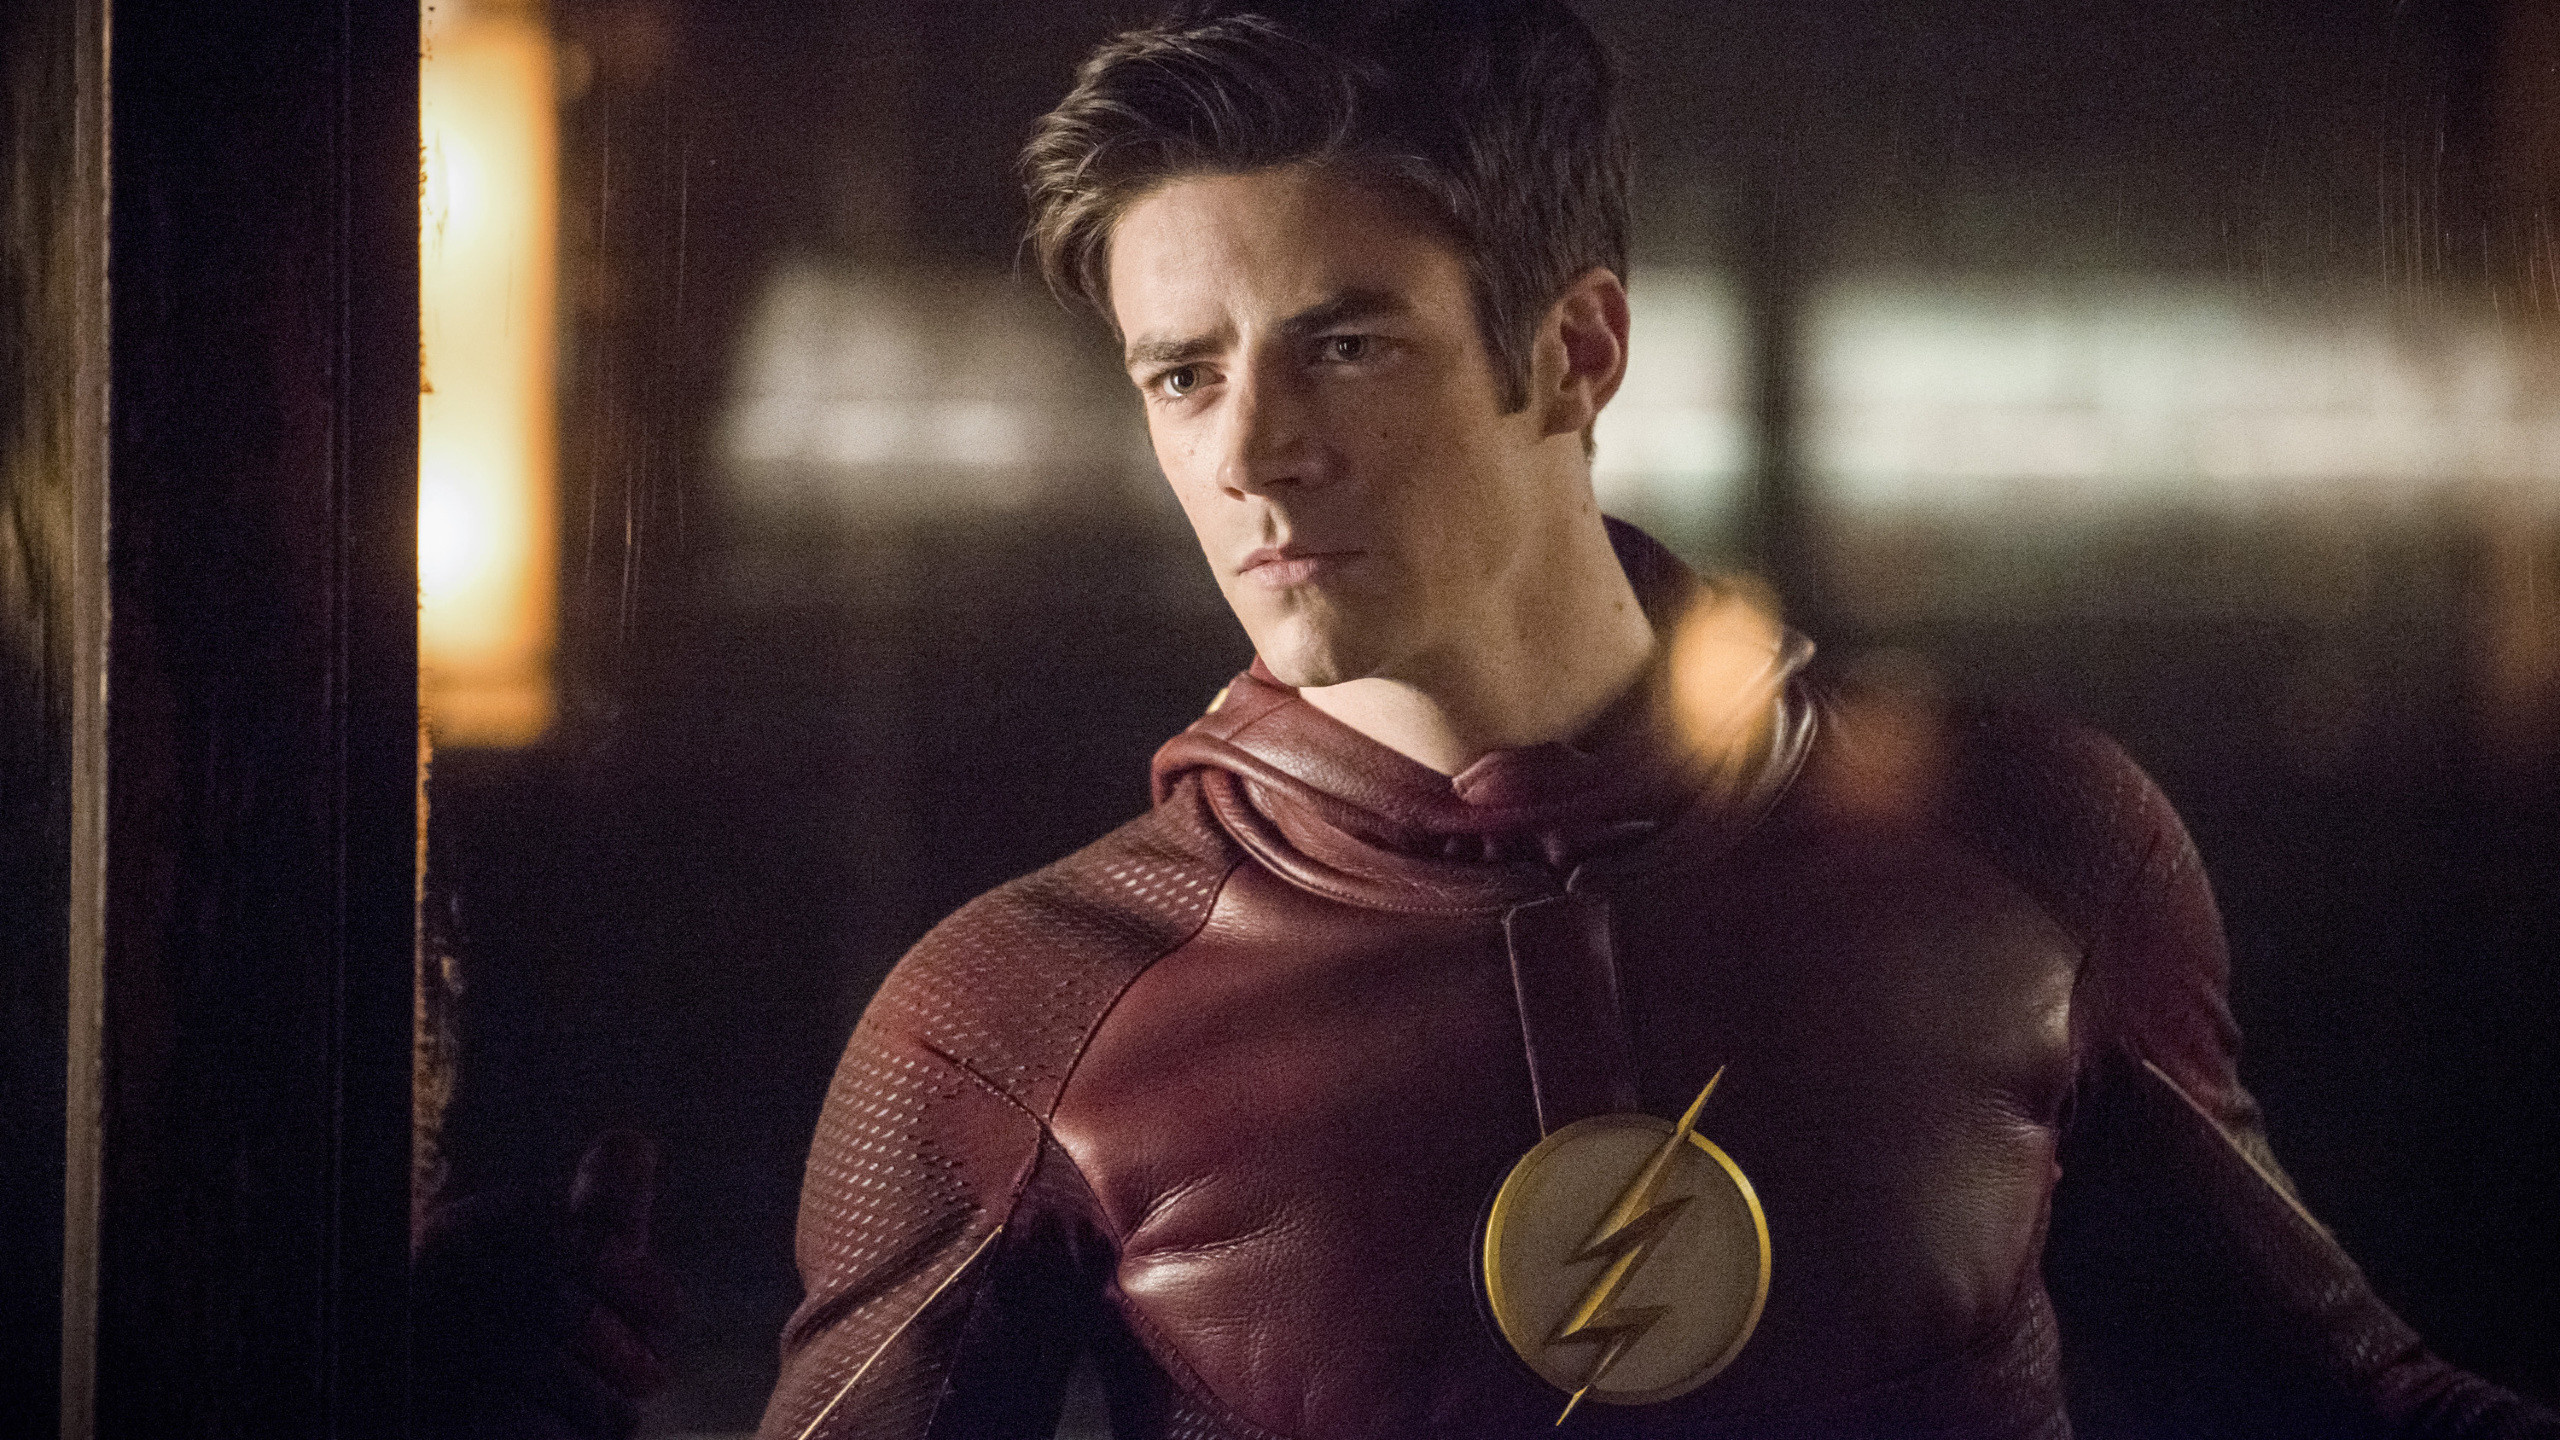 Grant Gustin: An American television series based on the Barry Allen incarnation of DC Comics character The Flash. 2560x1440 HD Wallpaper.